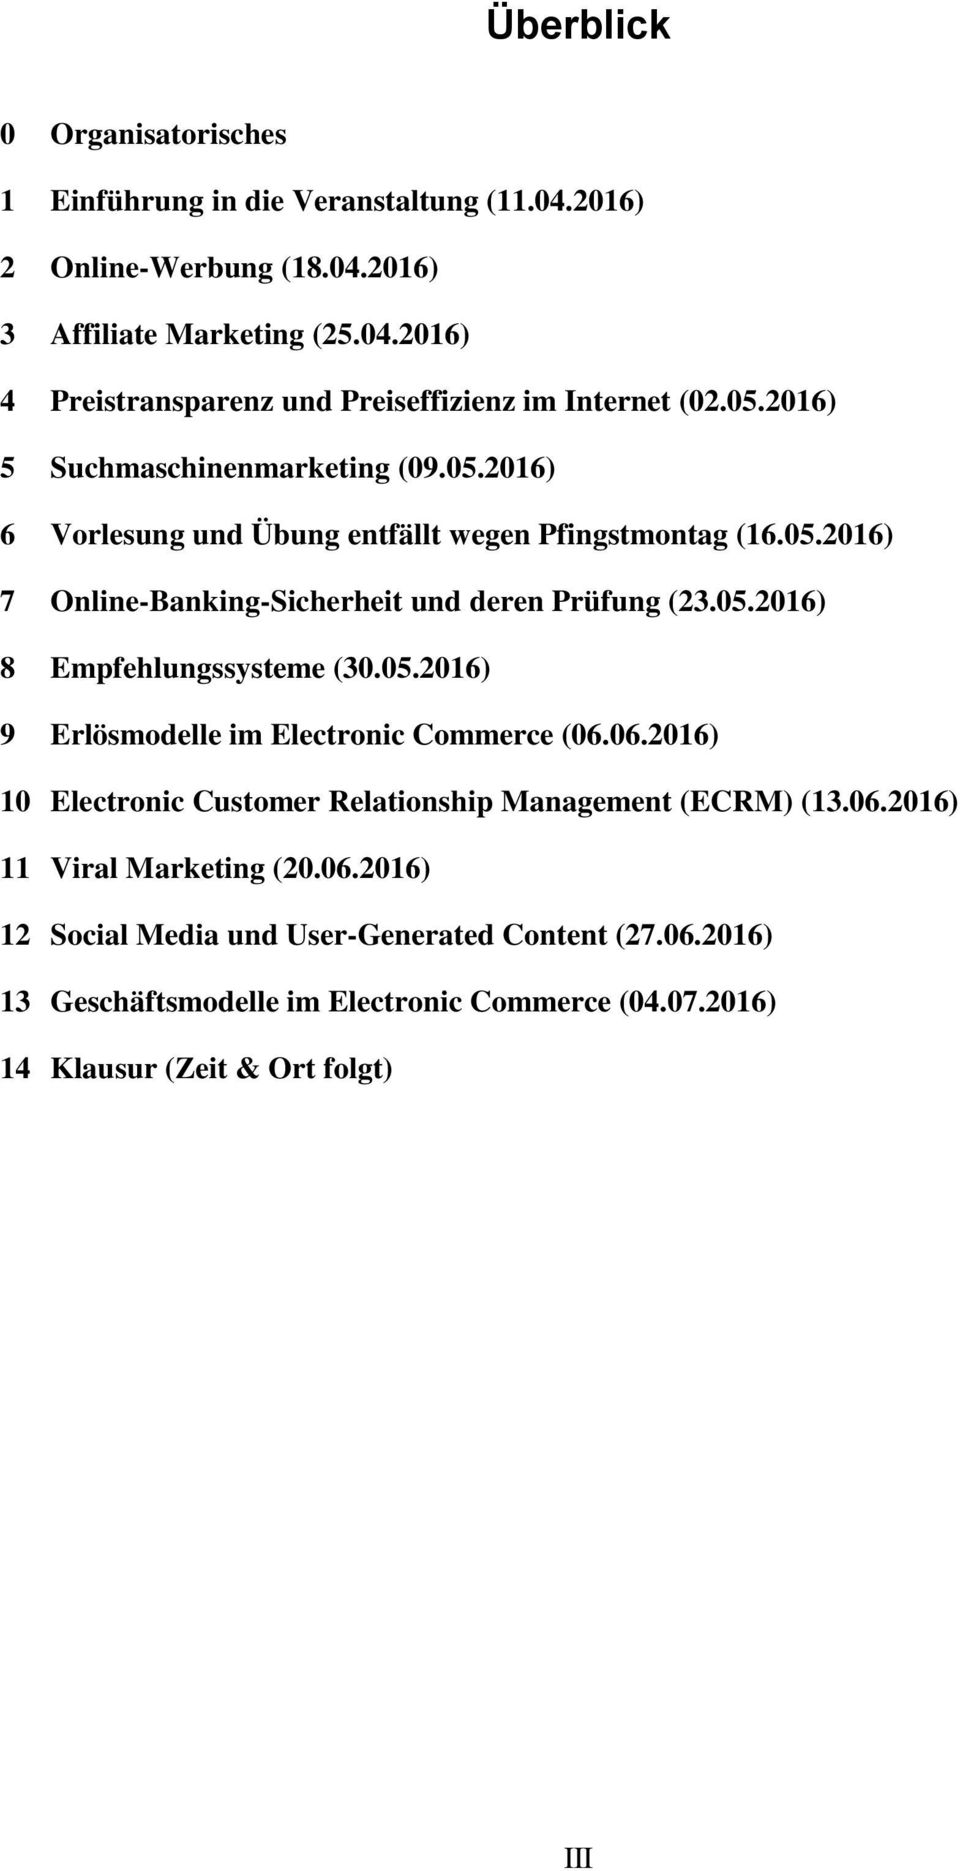 05.2016) 9 Erlösmodelle im Electronic Commerce (06.06.2016) 10 Electronic Customer Relationship Management (ECRM) (13.06.2016) 11 Viral Marketing (20.06.2016) 12 Social Media und User-Generated Content (27.